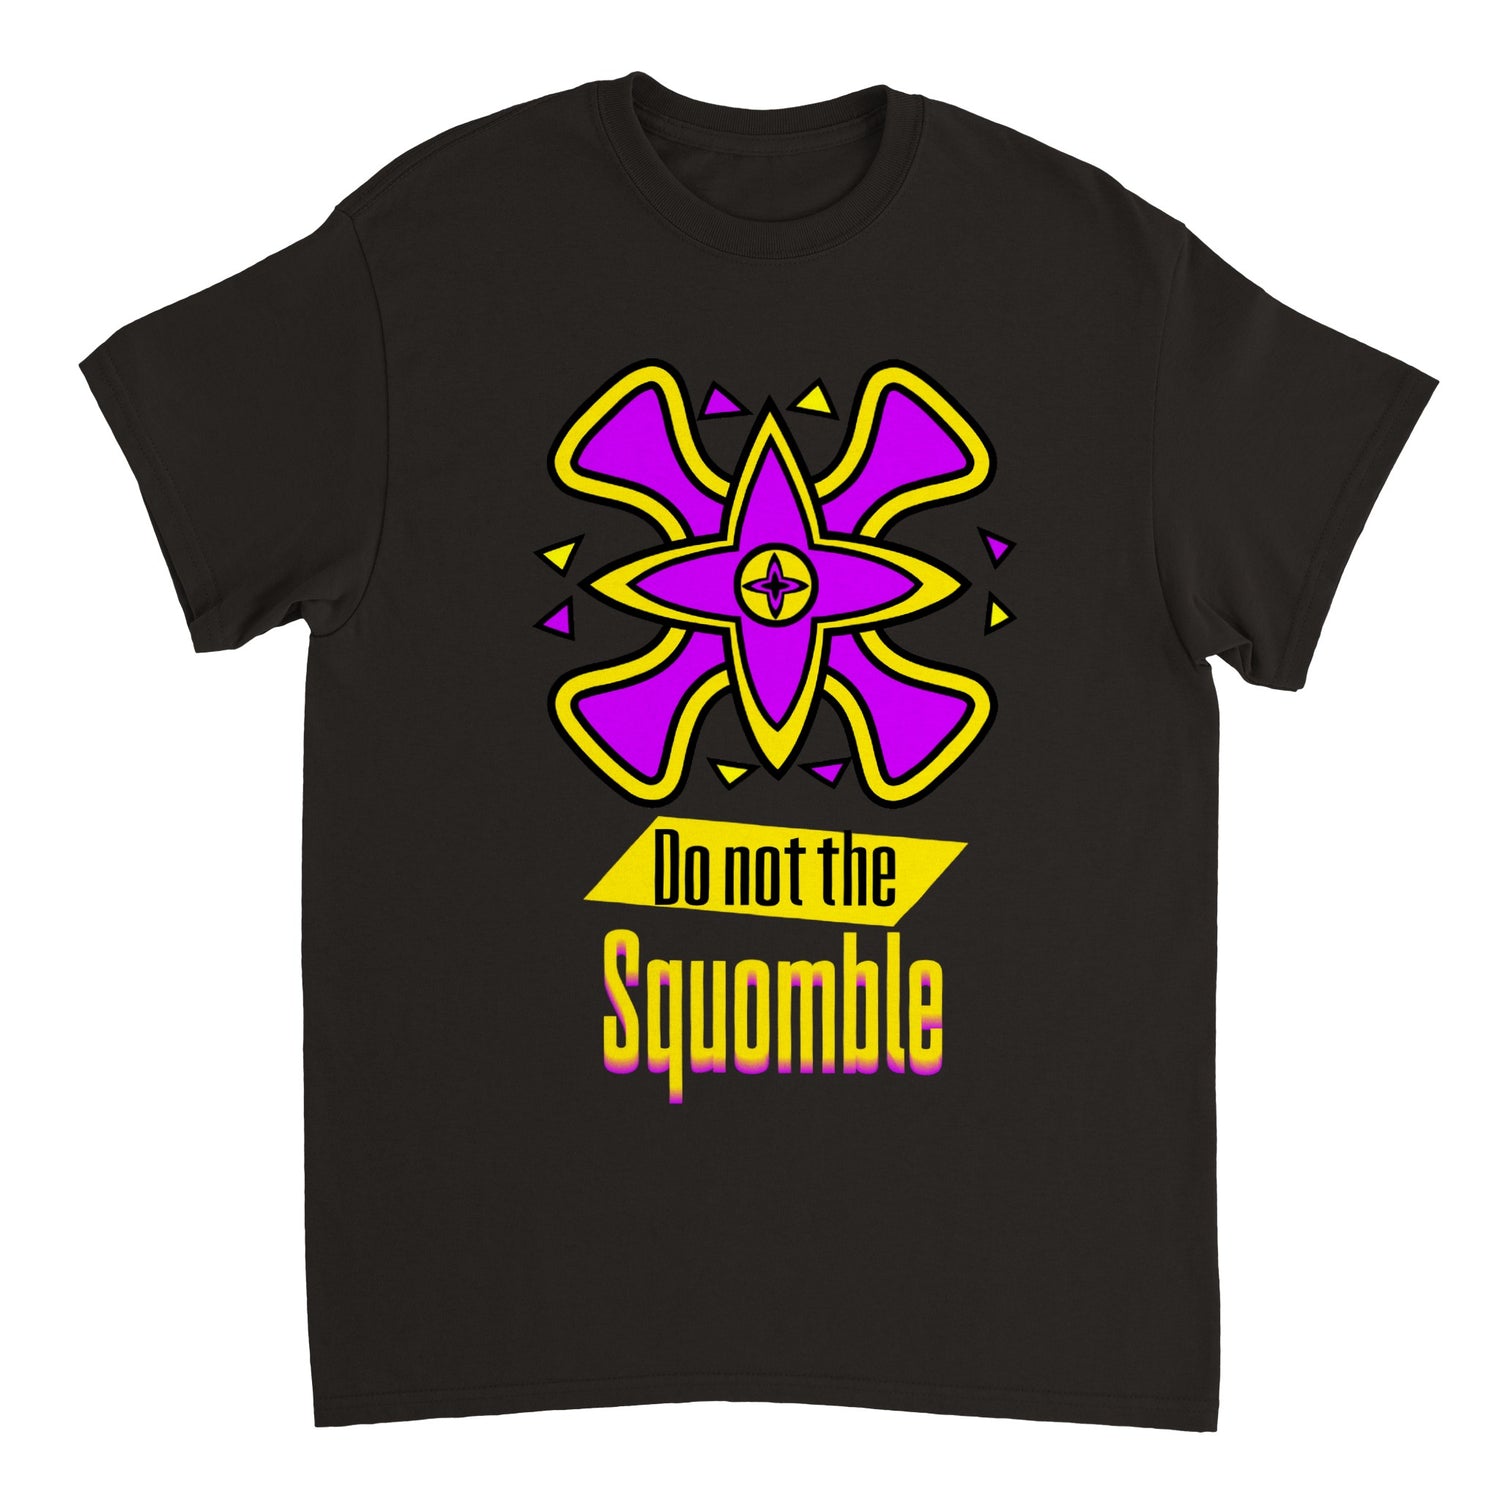 The Squomble Collection